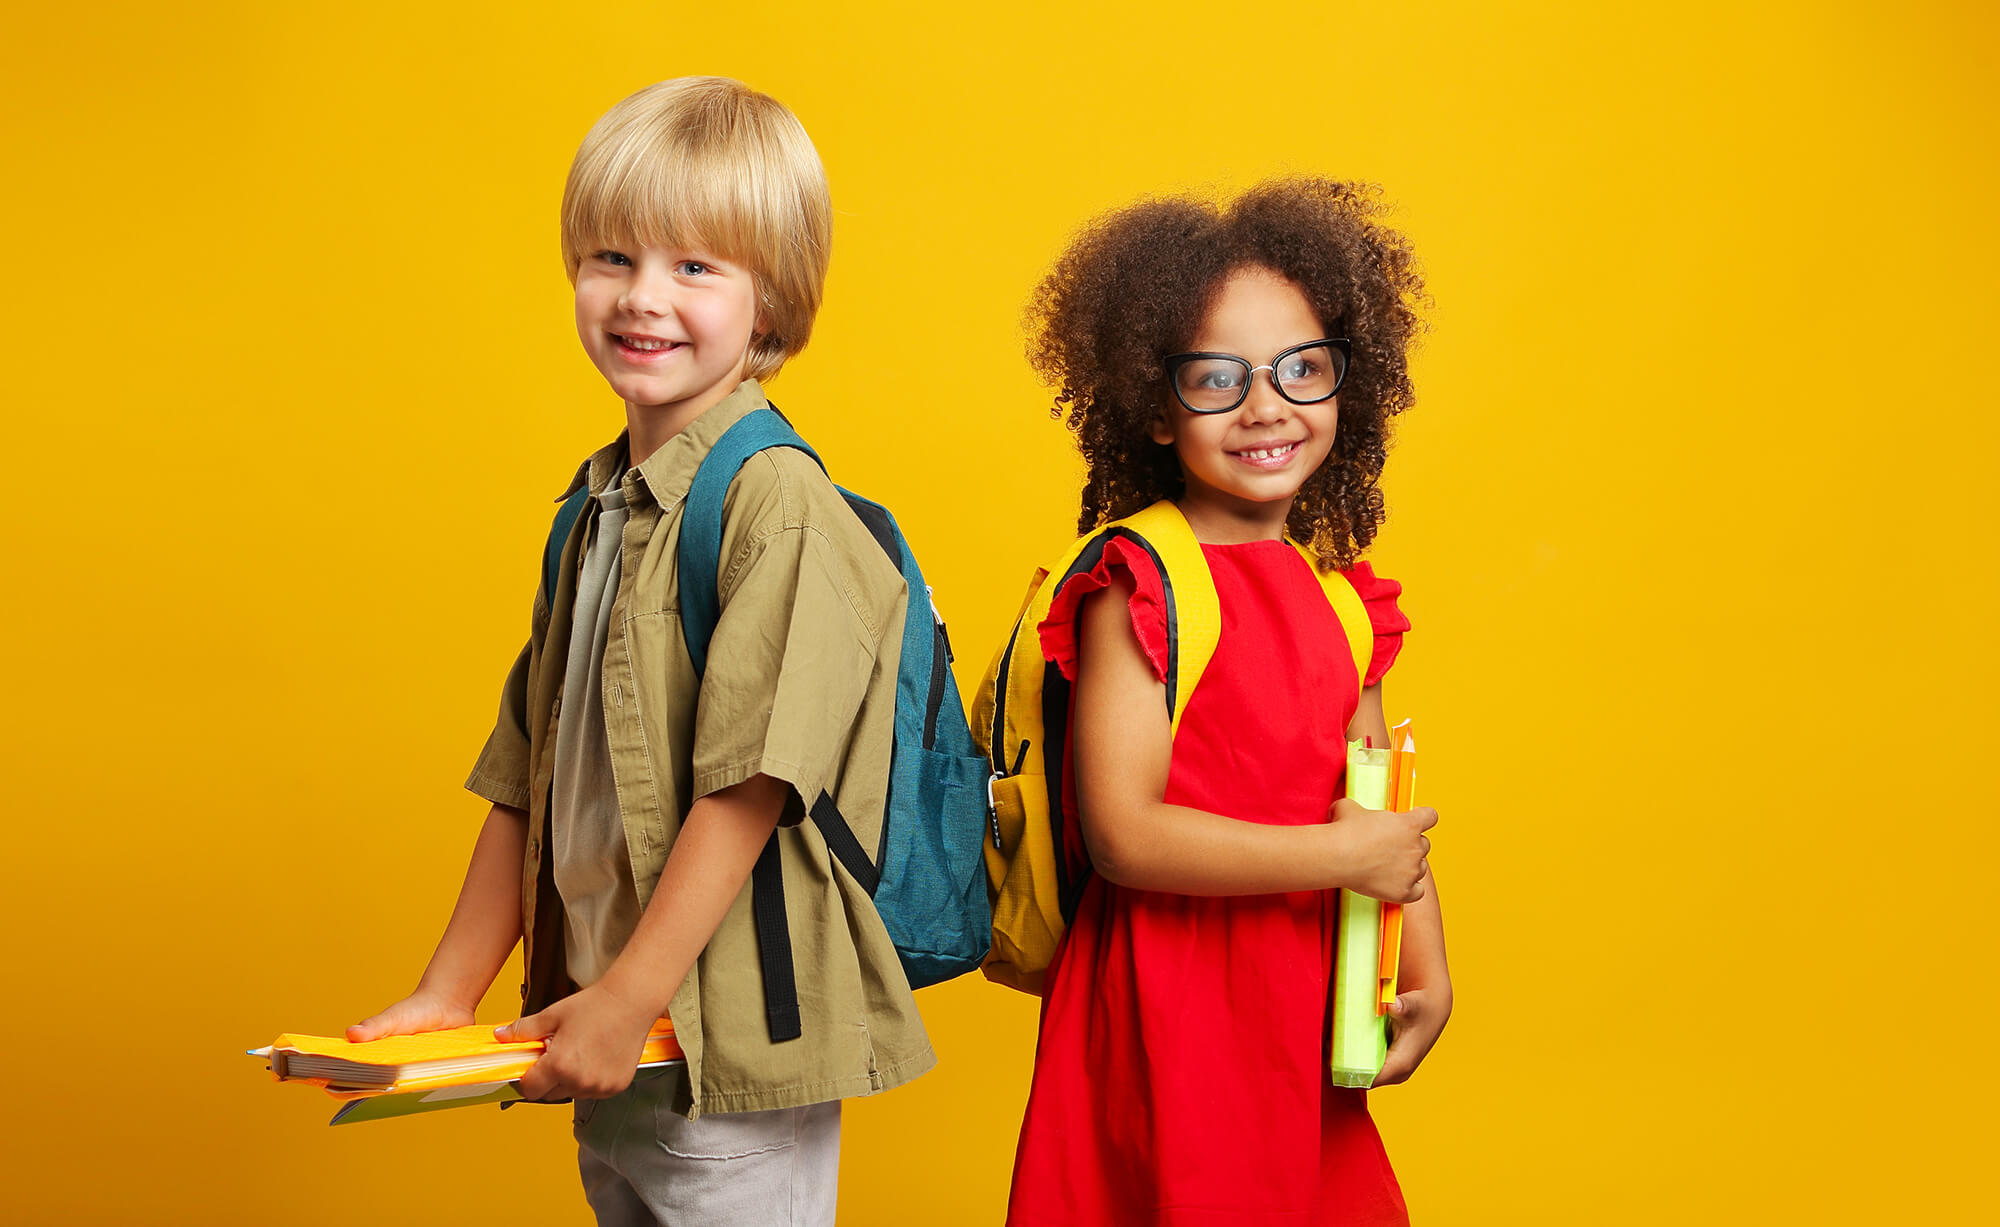 Two kids with backpacks on a yellow background